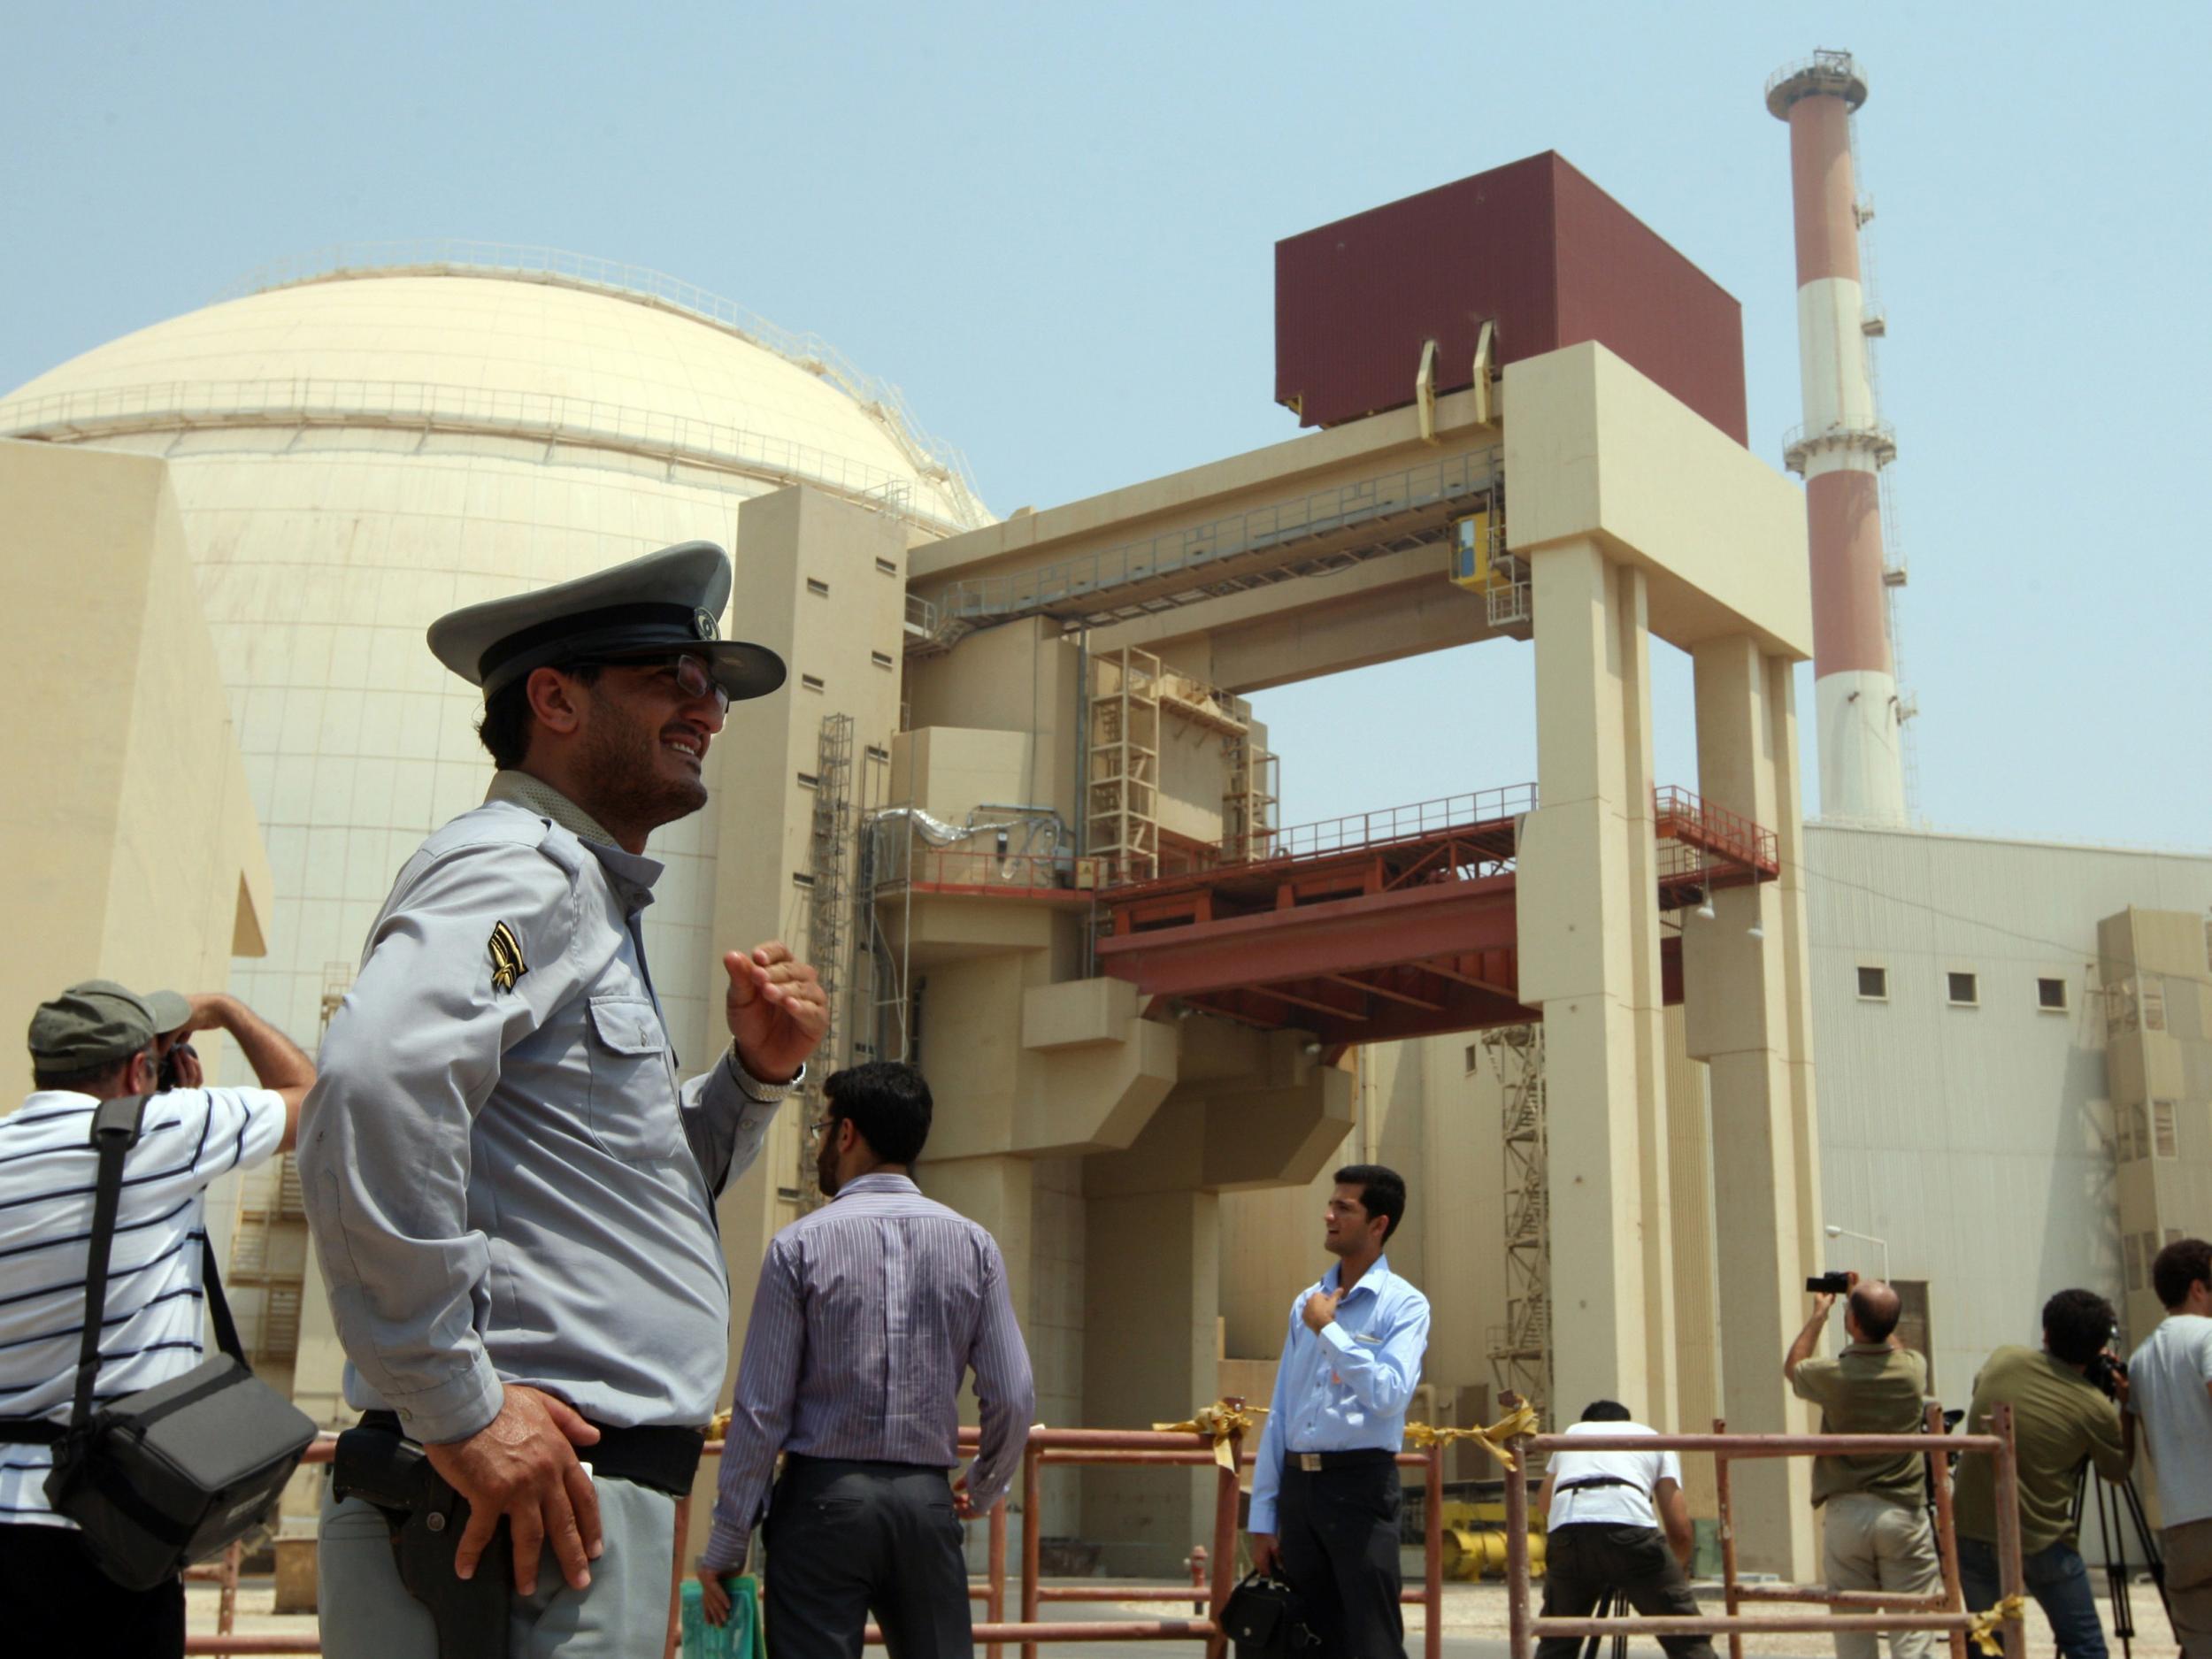 The Bushehr nuclear power plant in south Iran in a file photo from August 2010